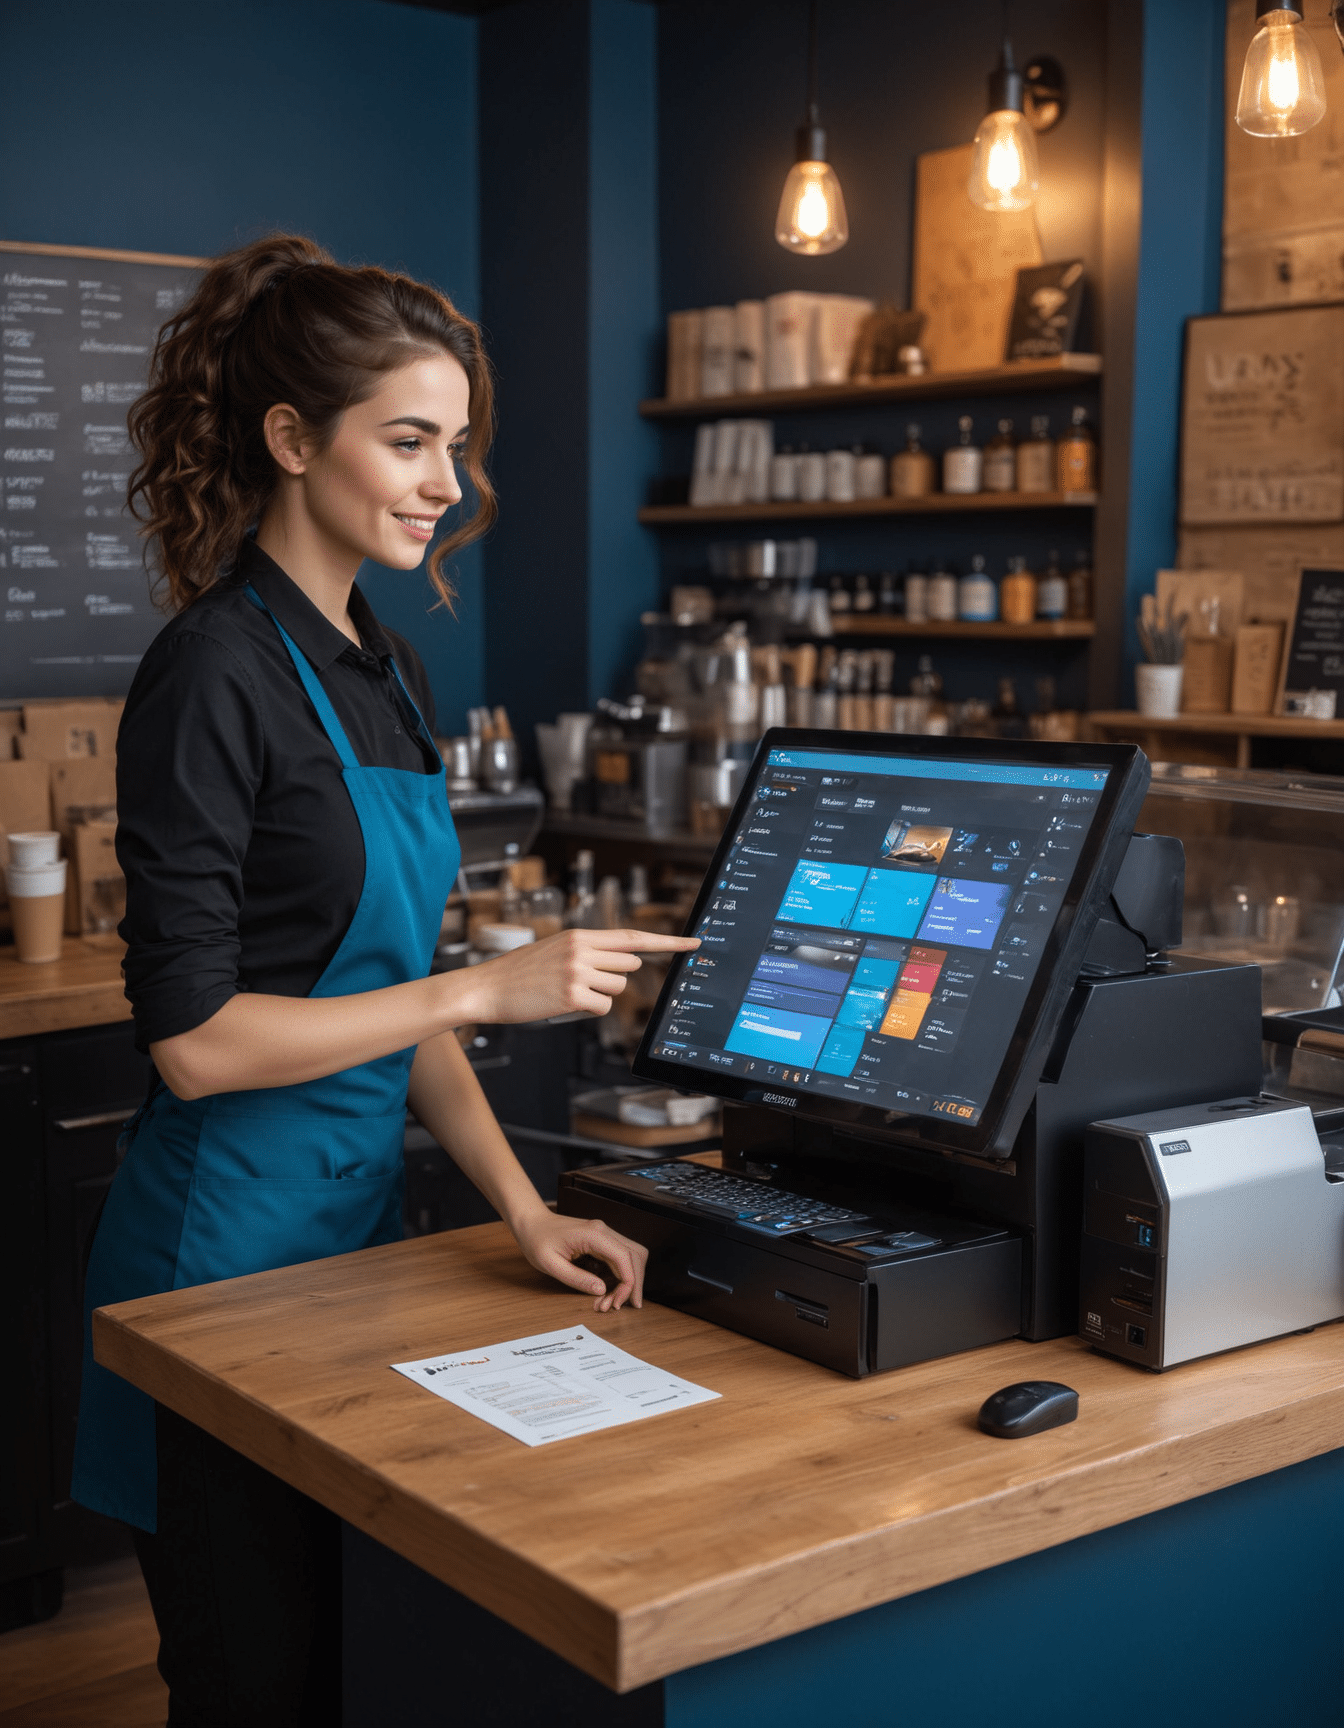 Mobile POS Systems